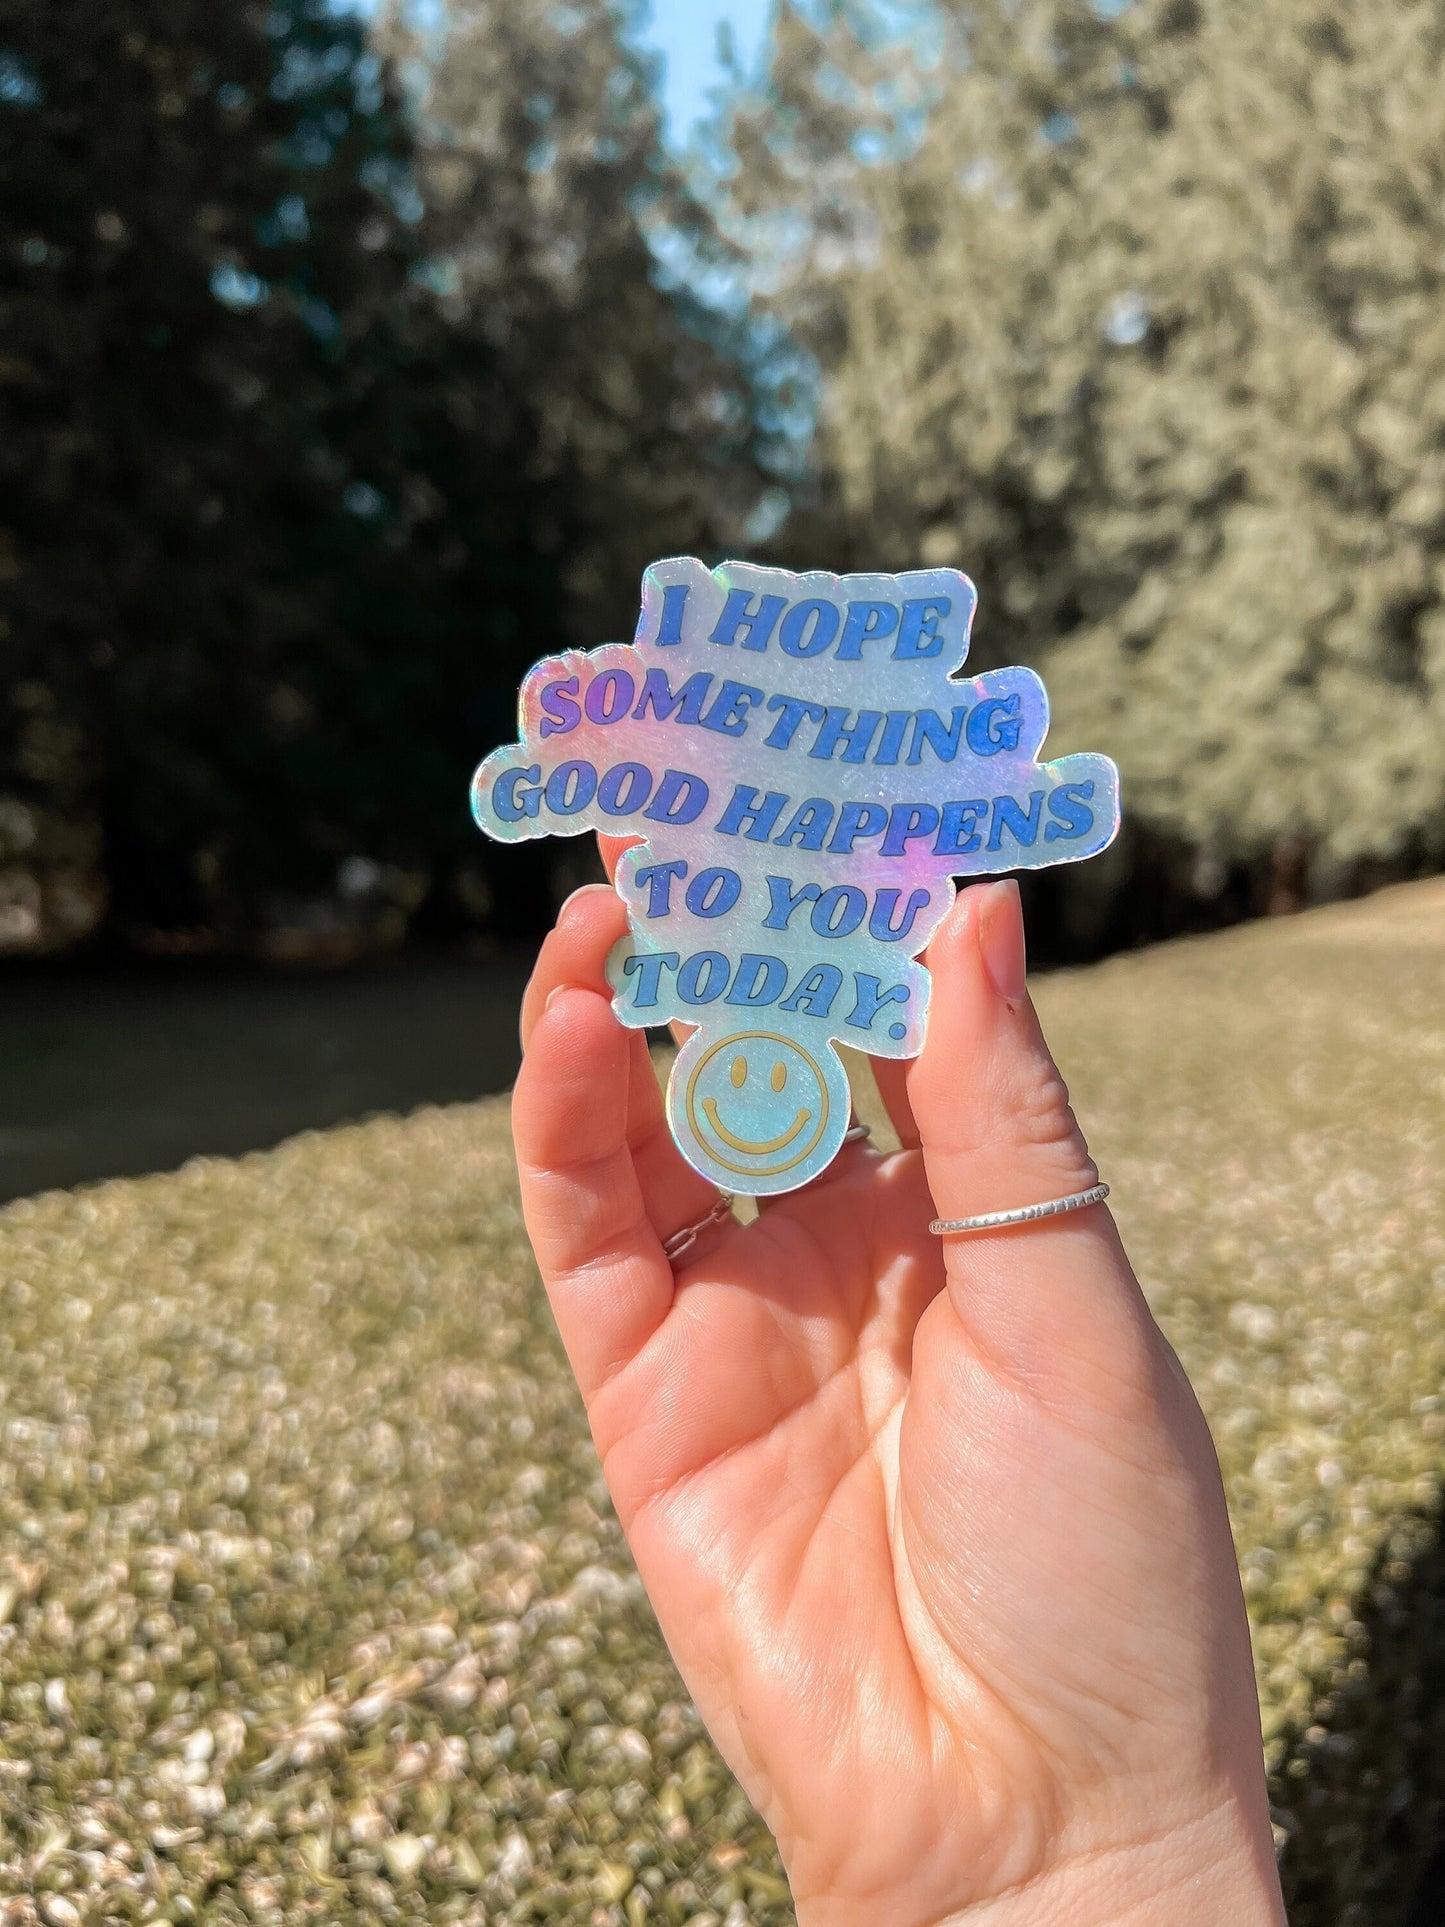 I Hope Something Good Happens to you Today Holographic Sticker